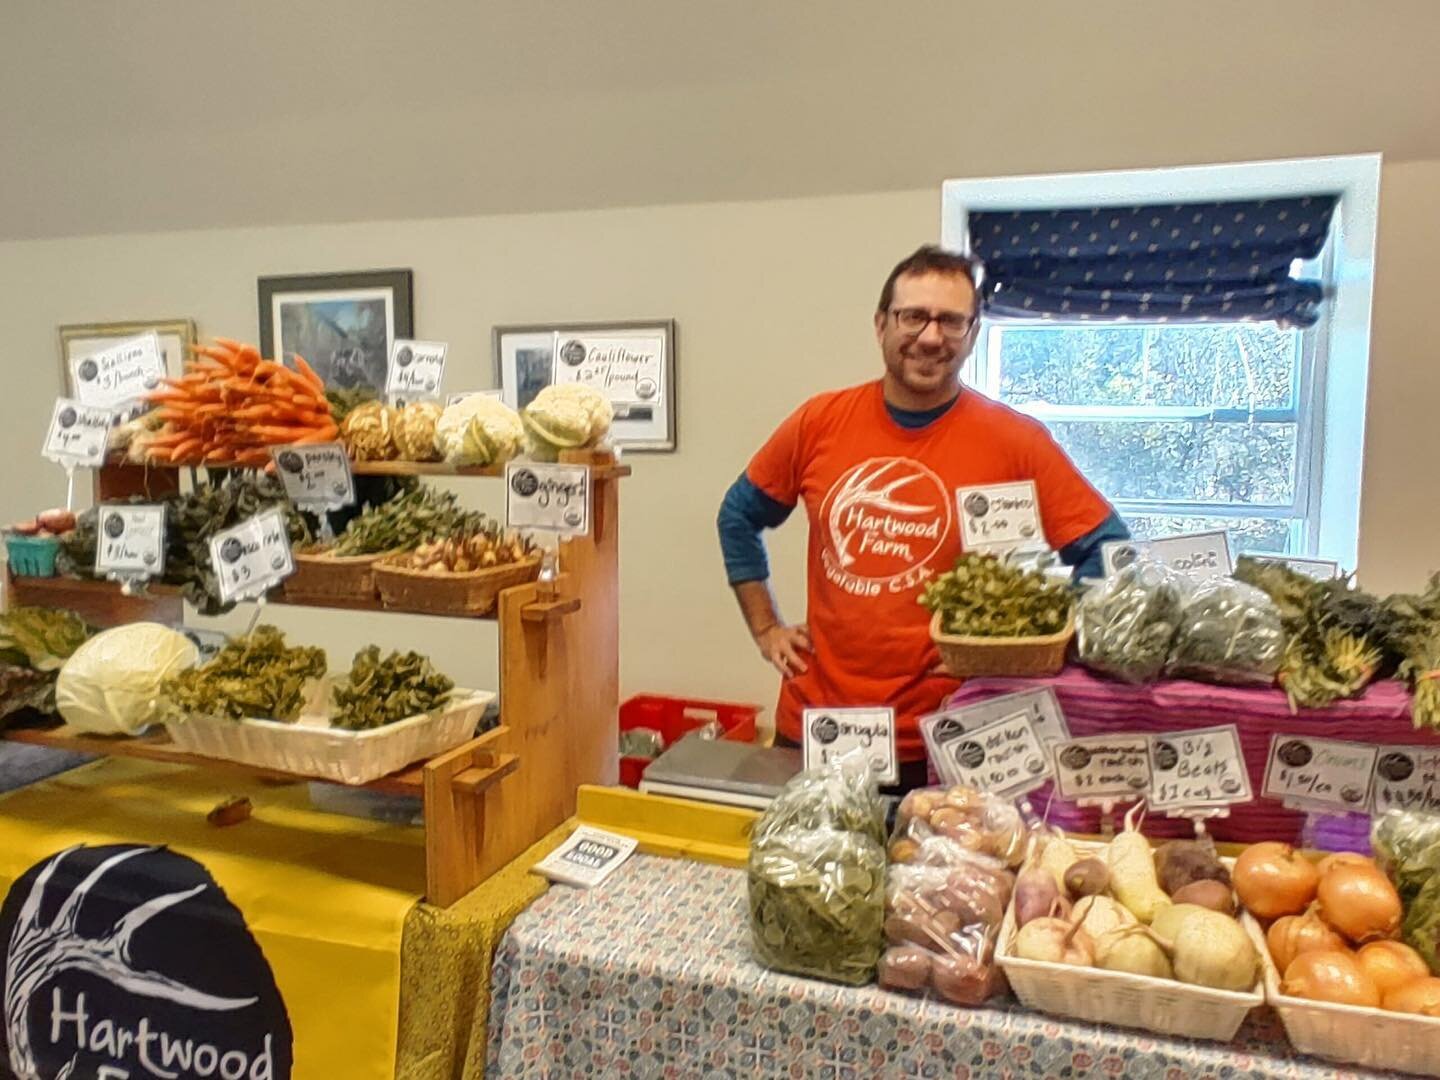 Set up at @cazenoviafarmersmarket in the #cazenovia American Legion till 1pm! Come and get your delicious veggies&hellip; carrots, greens, and so much more!